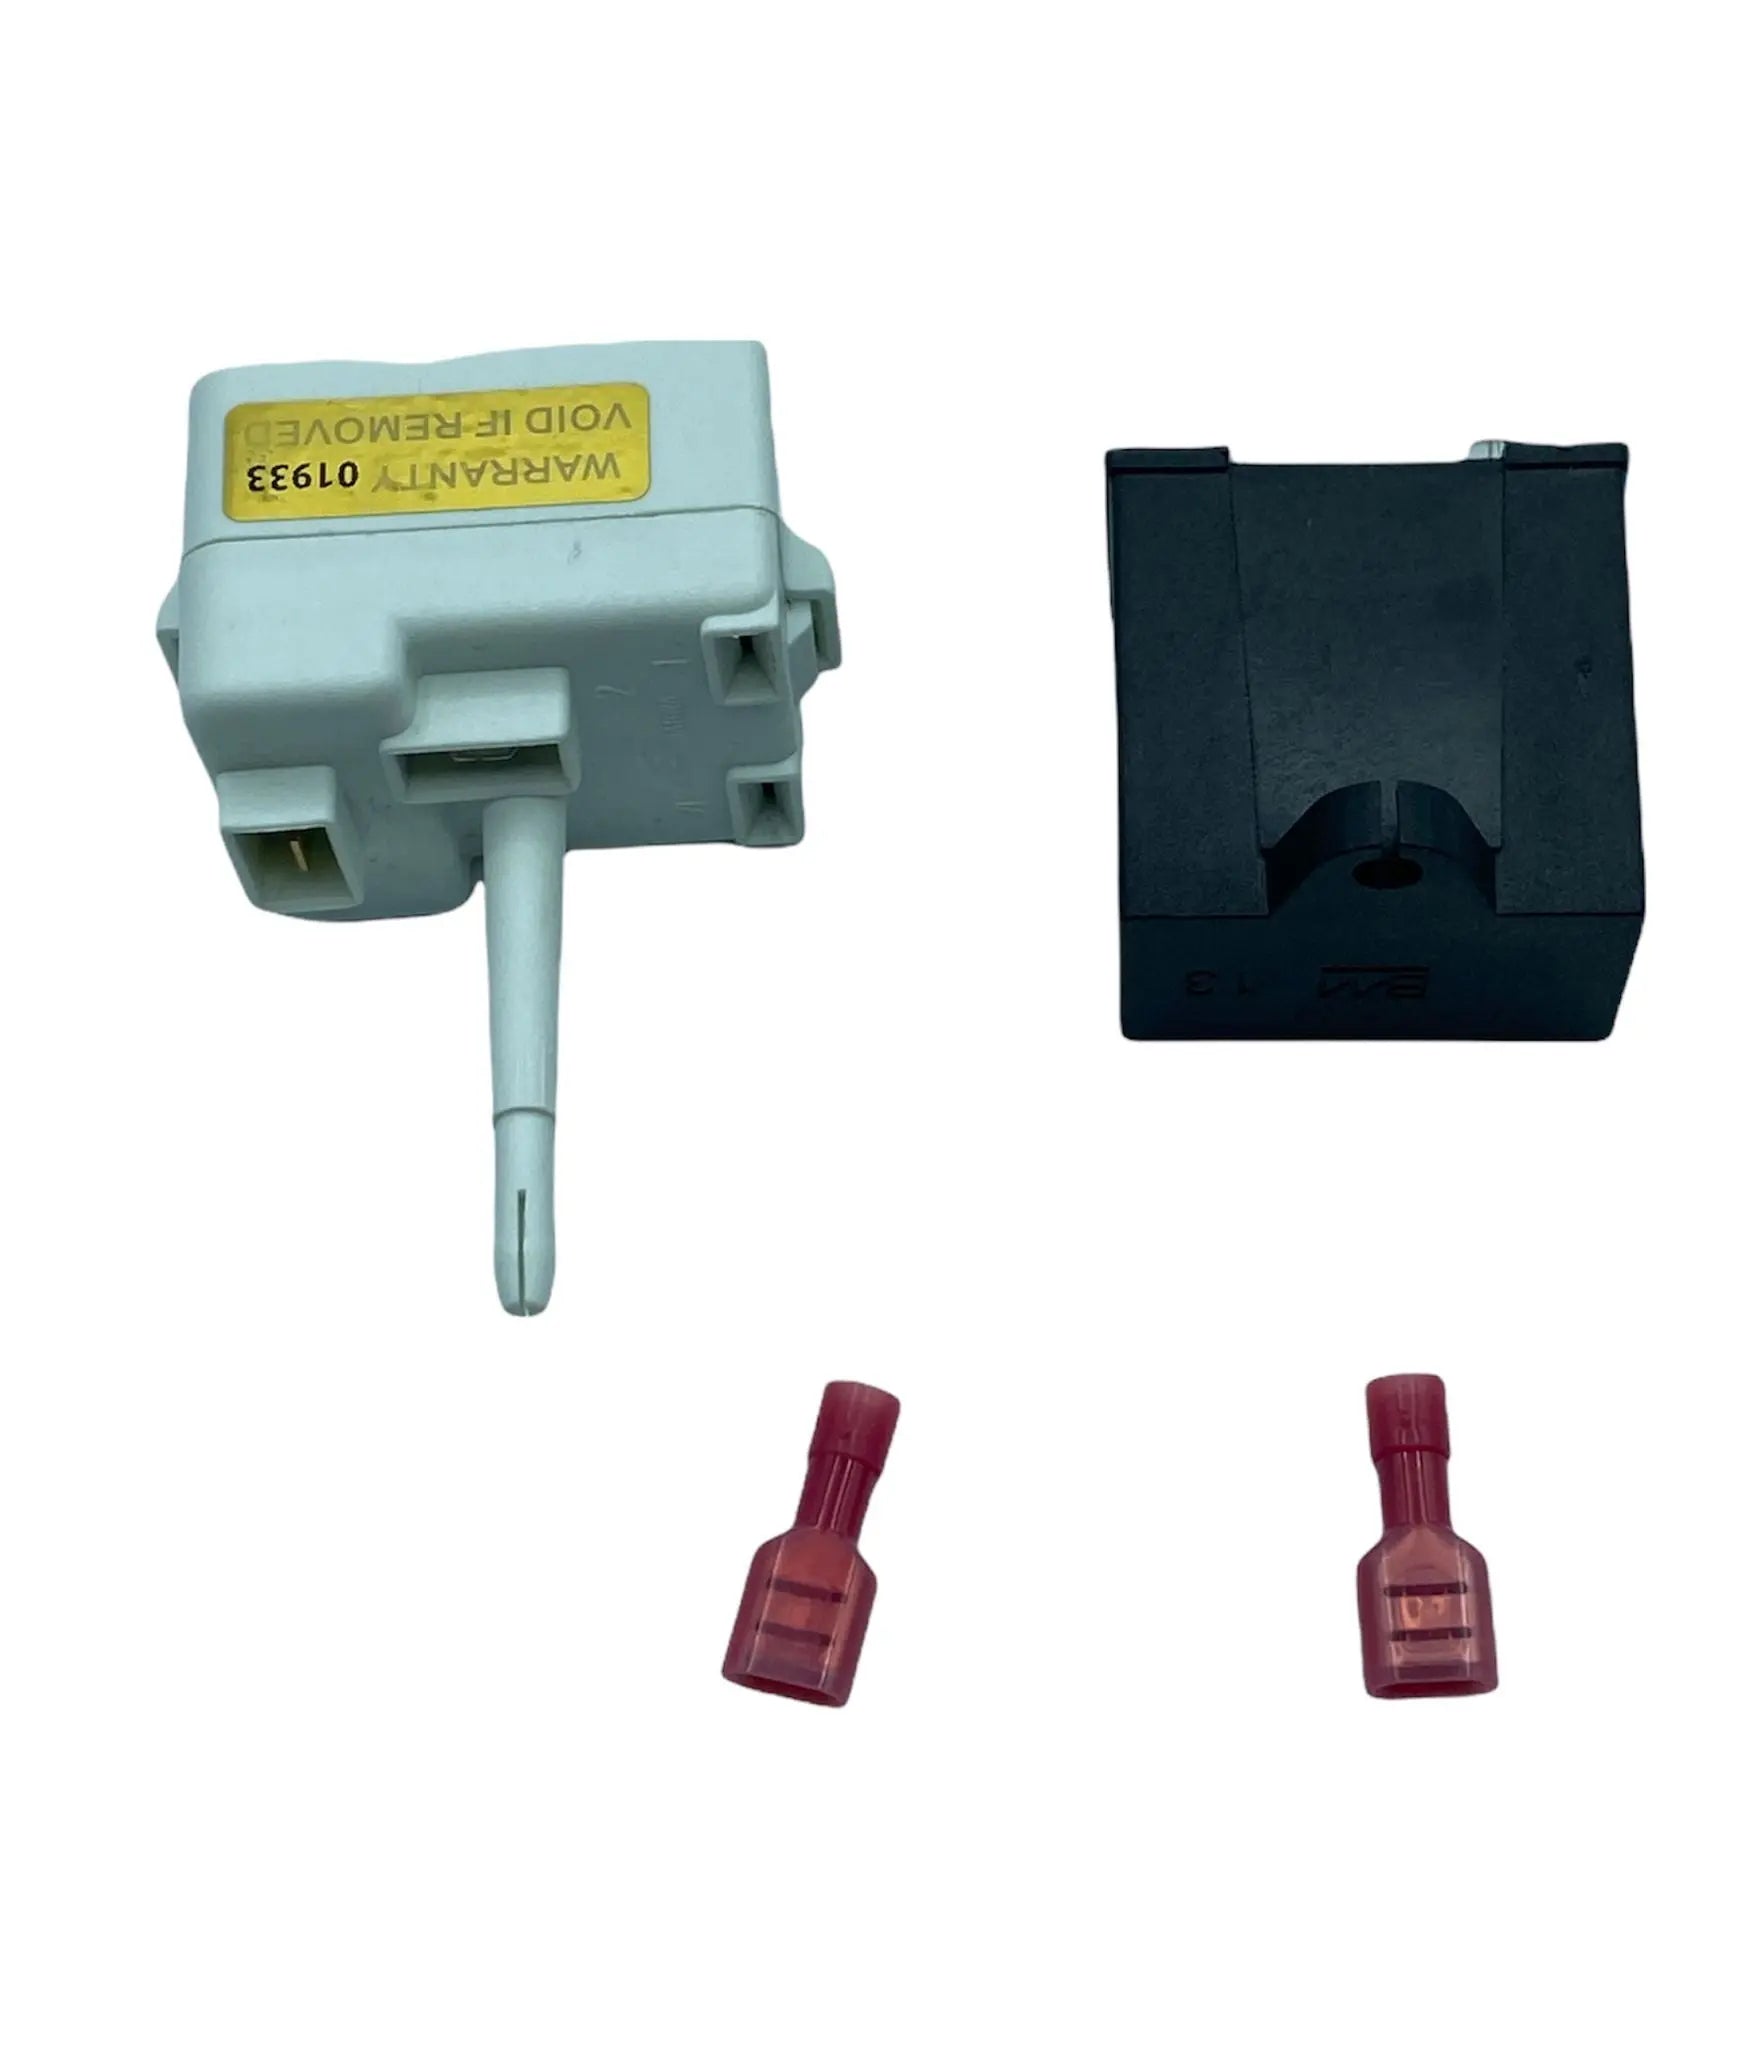 G.E Refrigerator Start Device Kit - WR07X10107 or WR87X10164 ,  REPLACES: 1478686 AP4345414 PS2323625 EAP2323625 PD00032878 INVERTEC